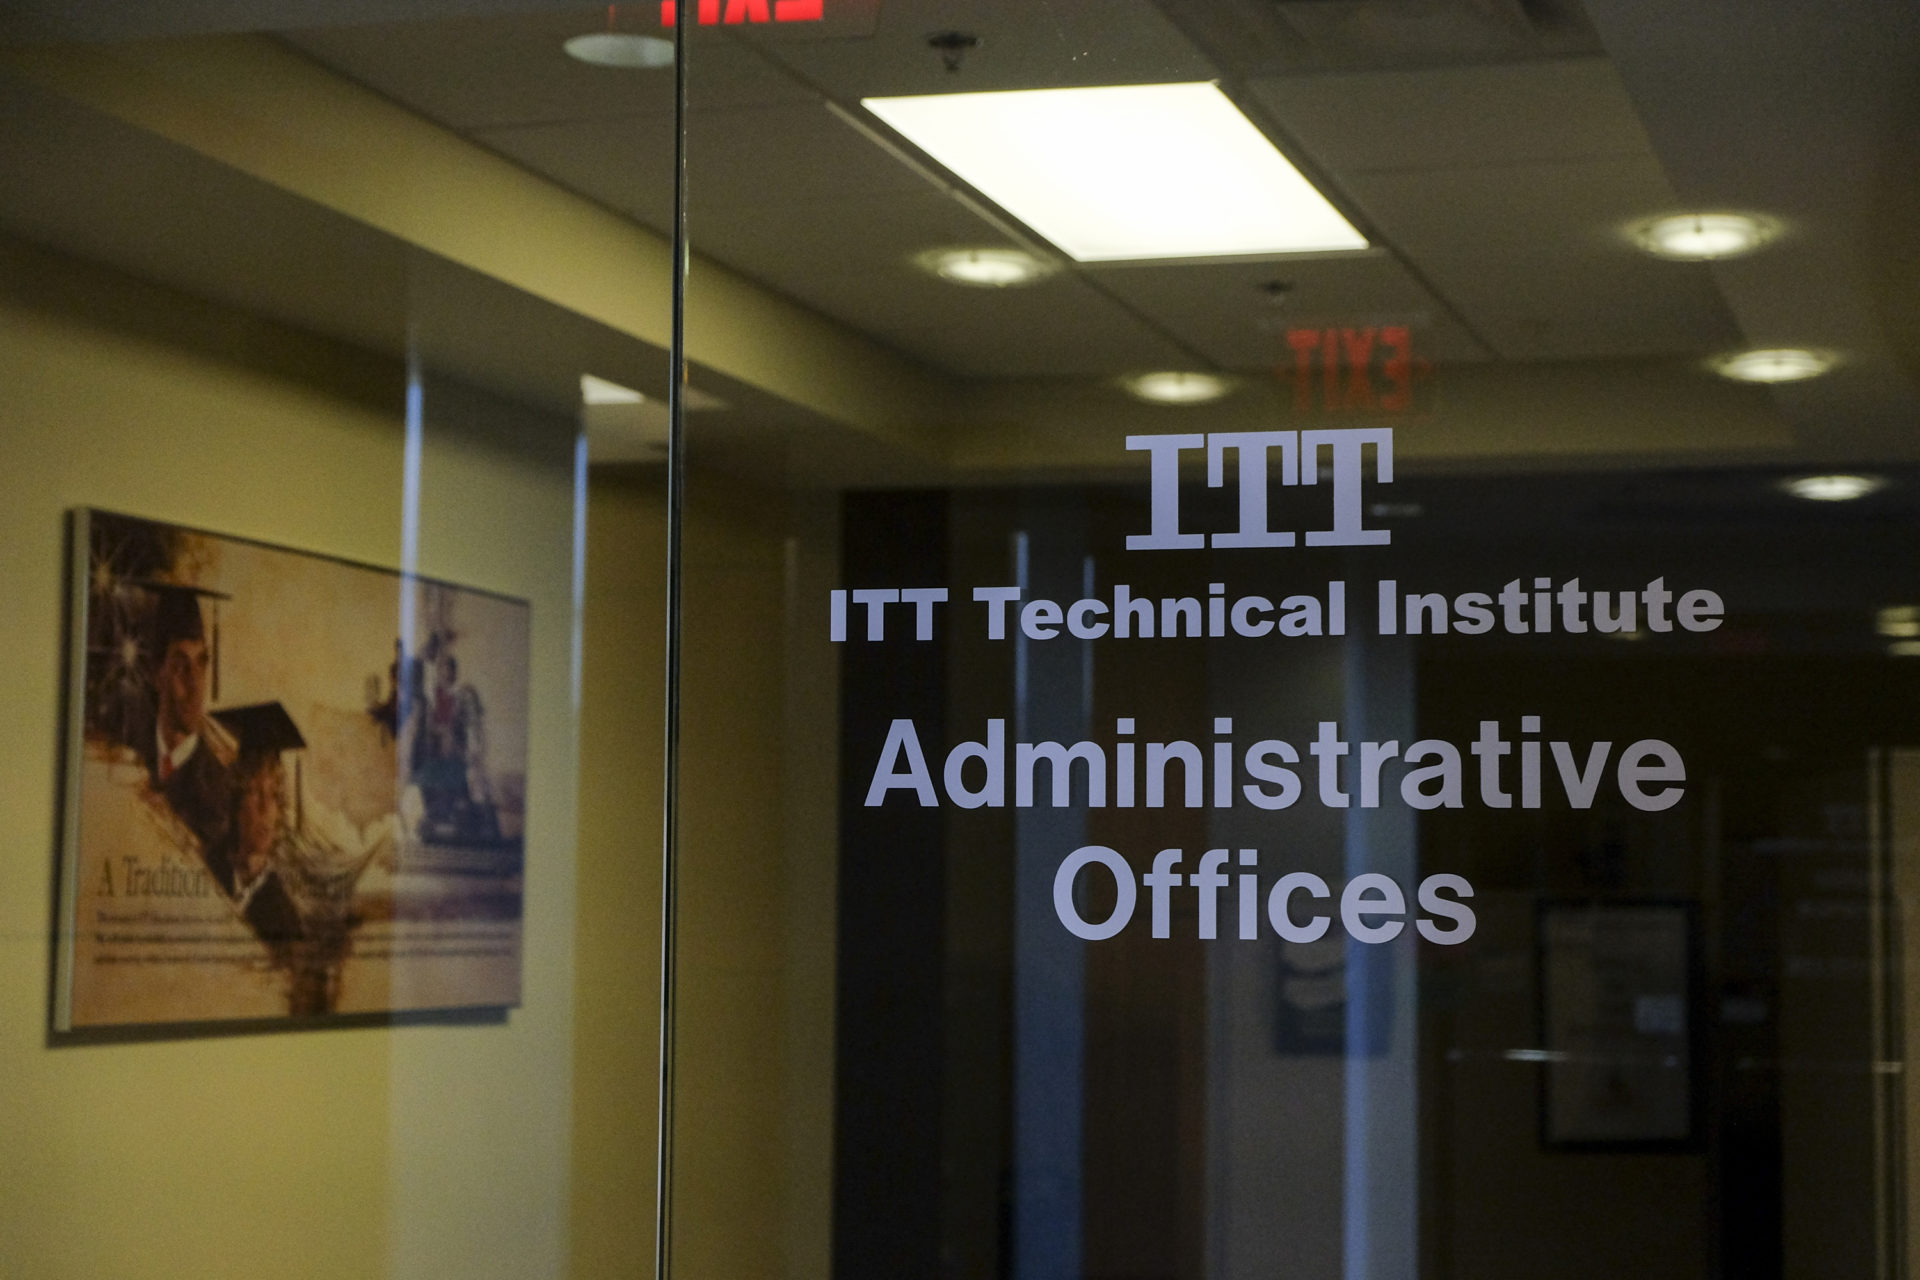 ITT Technical Institutes Shuts Down After 50 Years in Operation